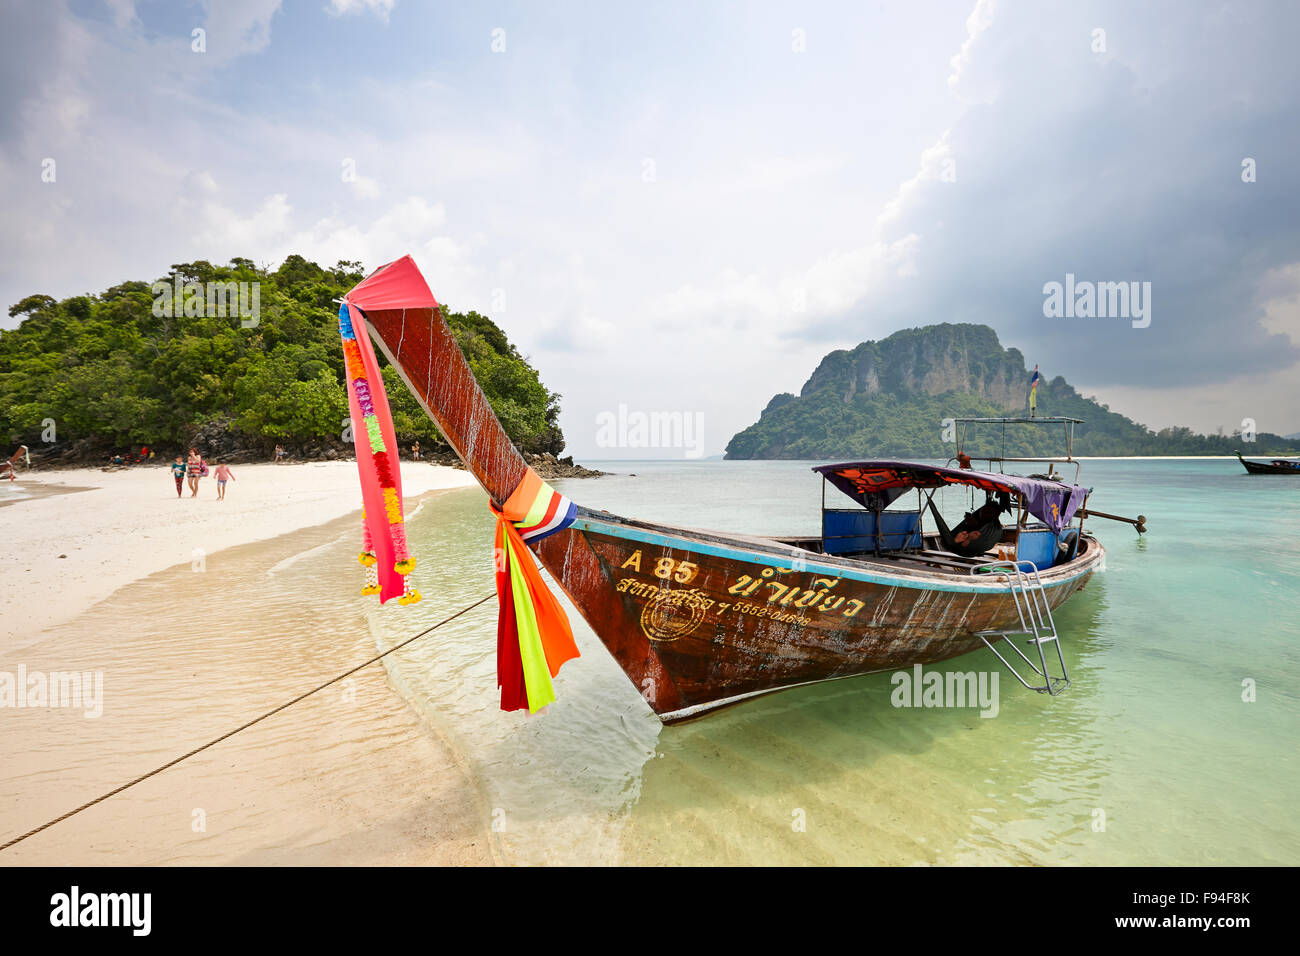 Beach on Tup Island (also known as Tub Island, Koh Tap or Koh Thap). Krabi Province, Thailand. Stock Photo